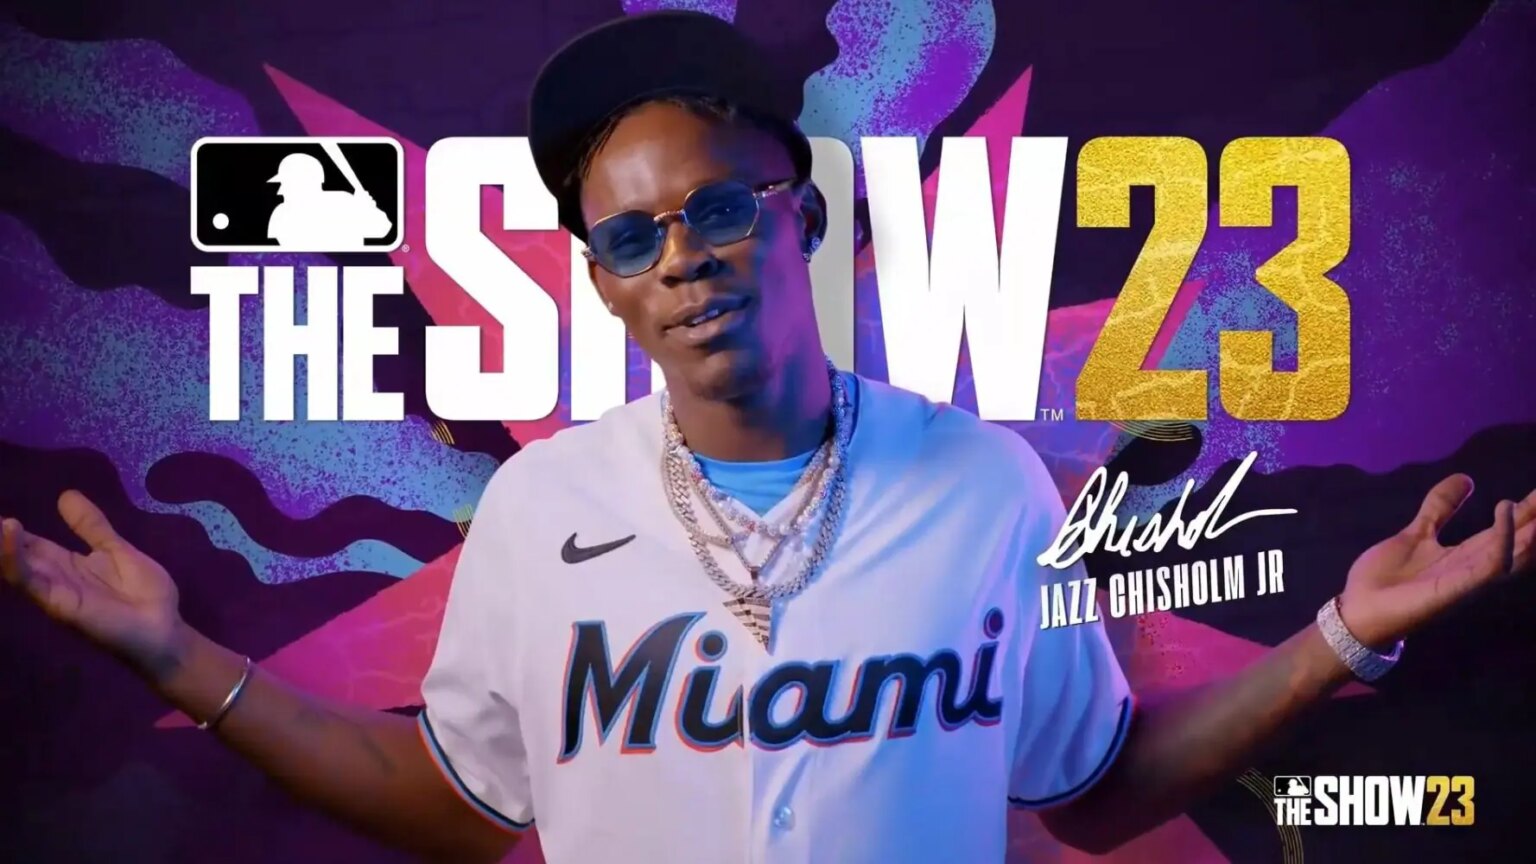 MLB The Show 23 Cover Athlete Jazz Chisholm Jr. Featured